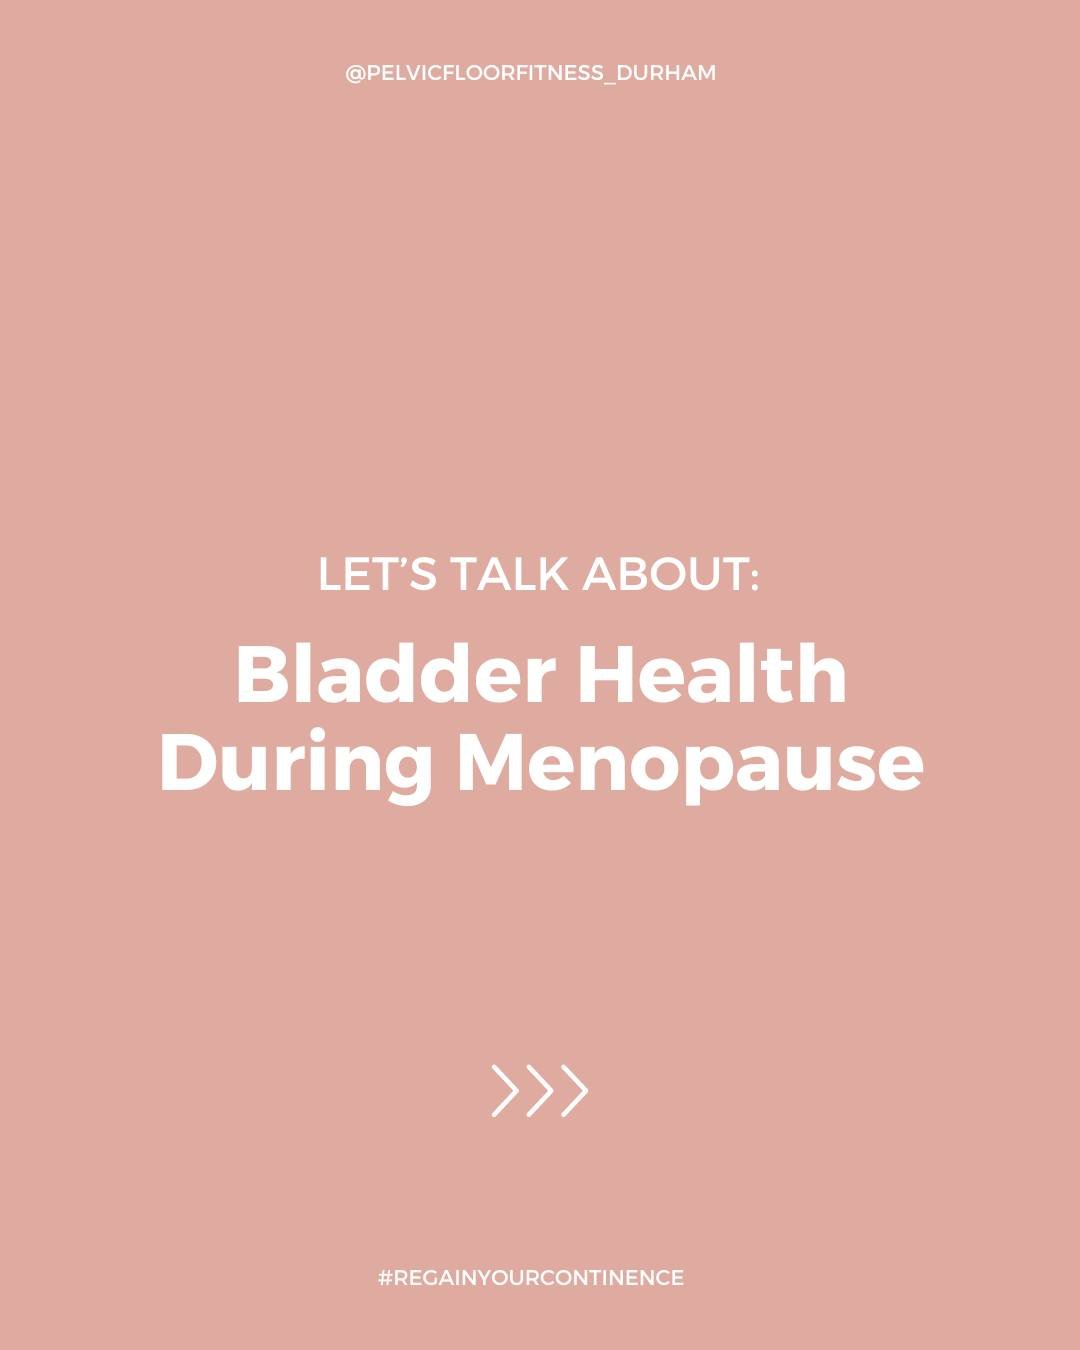 💪💧 Don't worry, you're not alone. Many women experience changes in bladder function during menopause, so there's no shame in discussing it openly and seeking support. Whether it's through lifestyle adjustments, pelvic floor exercises, or medical in